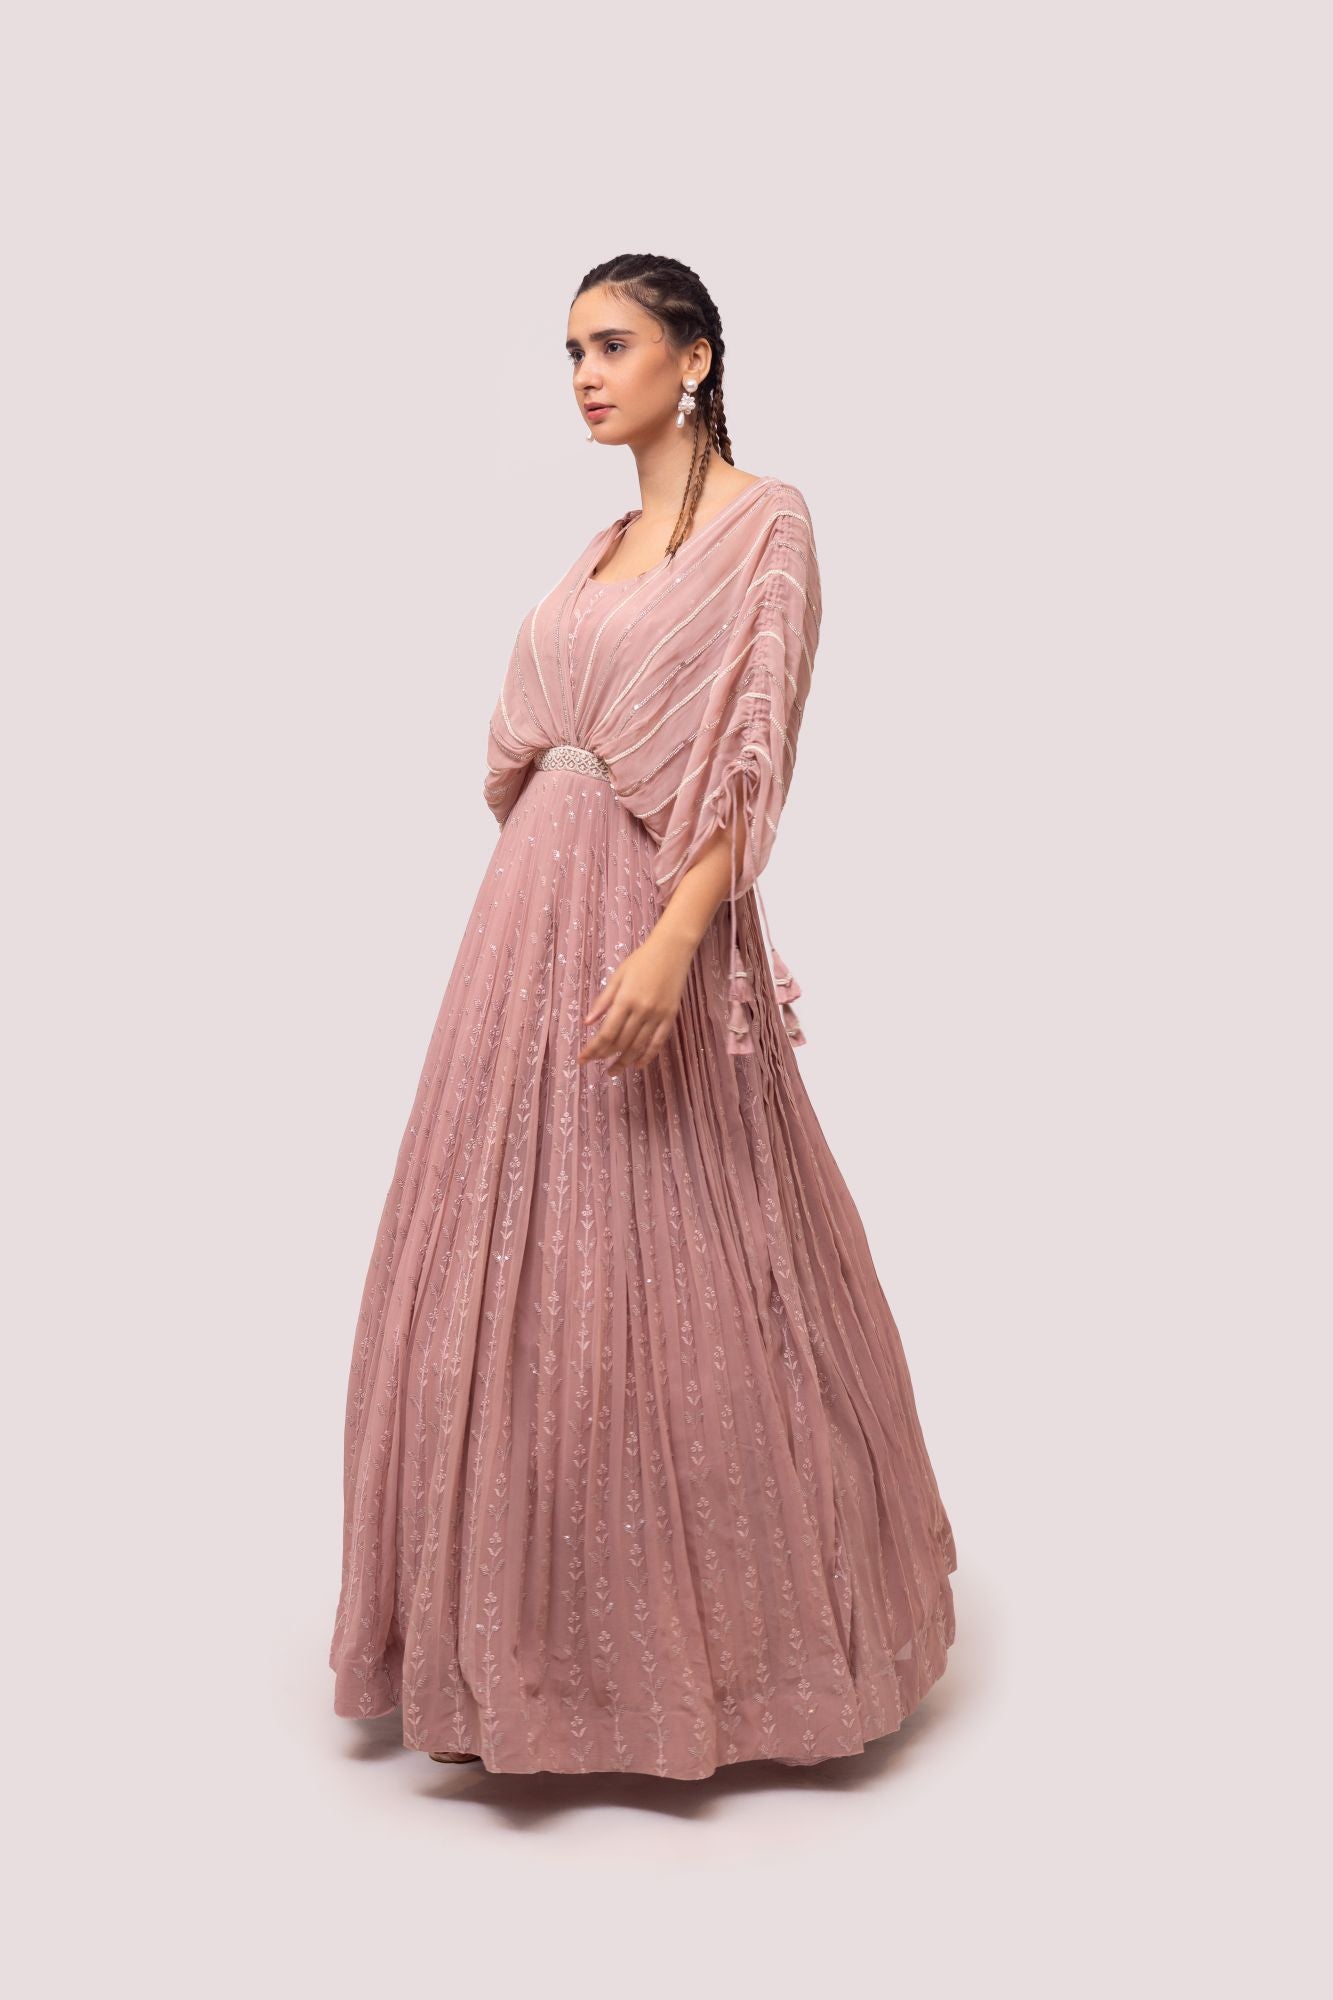 Shop stunning peach chikan gown online in USA. Shop the best and latest designs in embroidered sarees, designer sarees, Anarkali suit, lehengas, sharara suits for weddings and special occasions from Pure Elegance Indian fashion store in USA.-gown